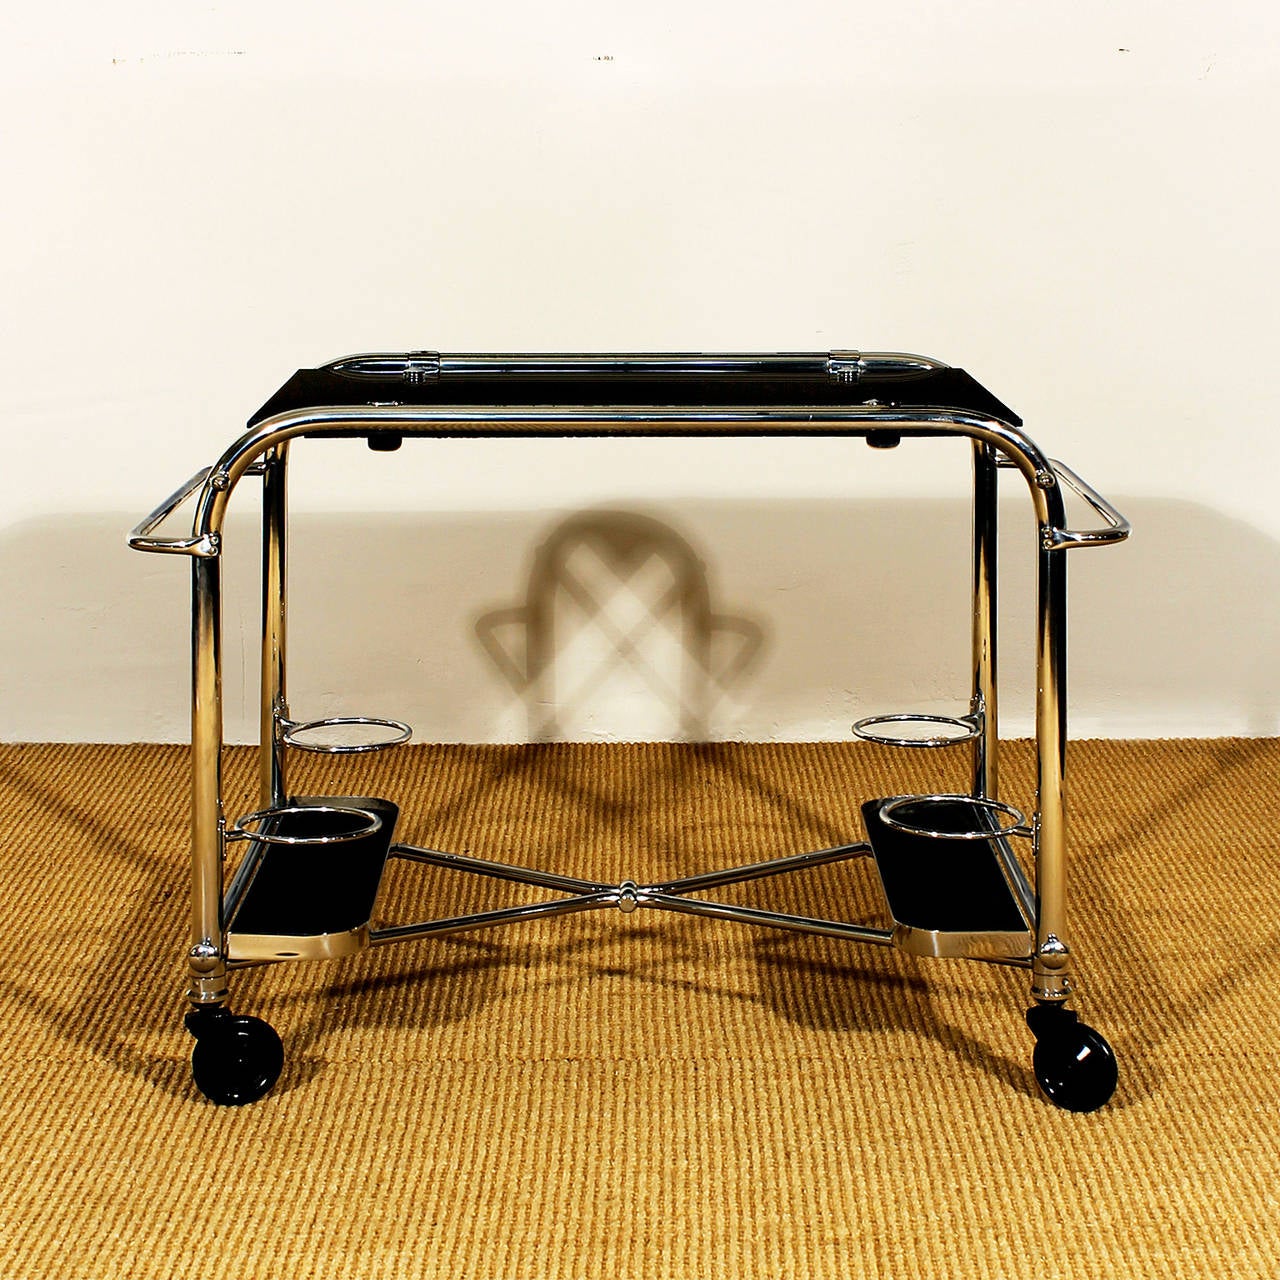 Art Deco bar cart, chrome plated metal and black opaline on top.
France c. 1930